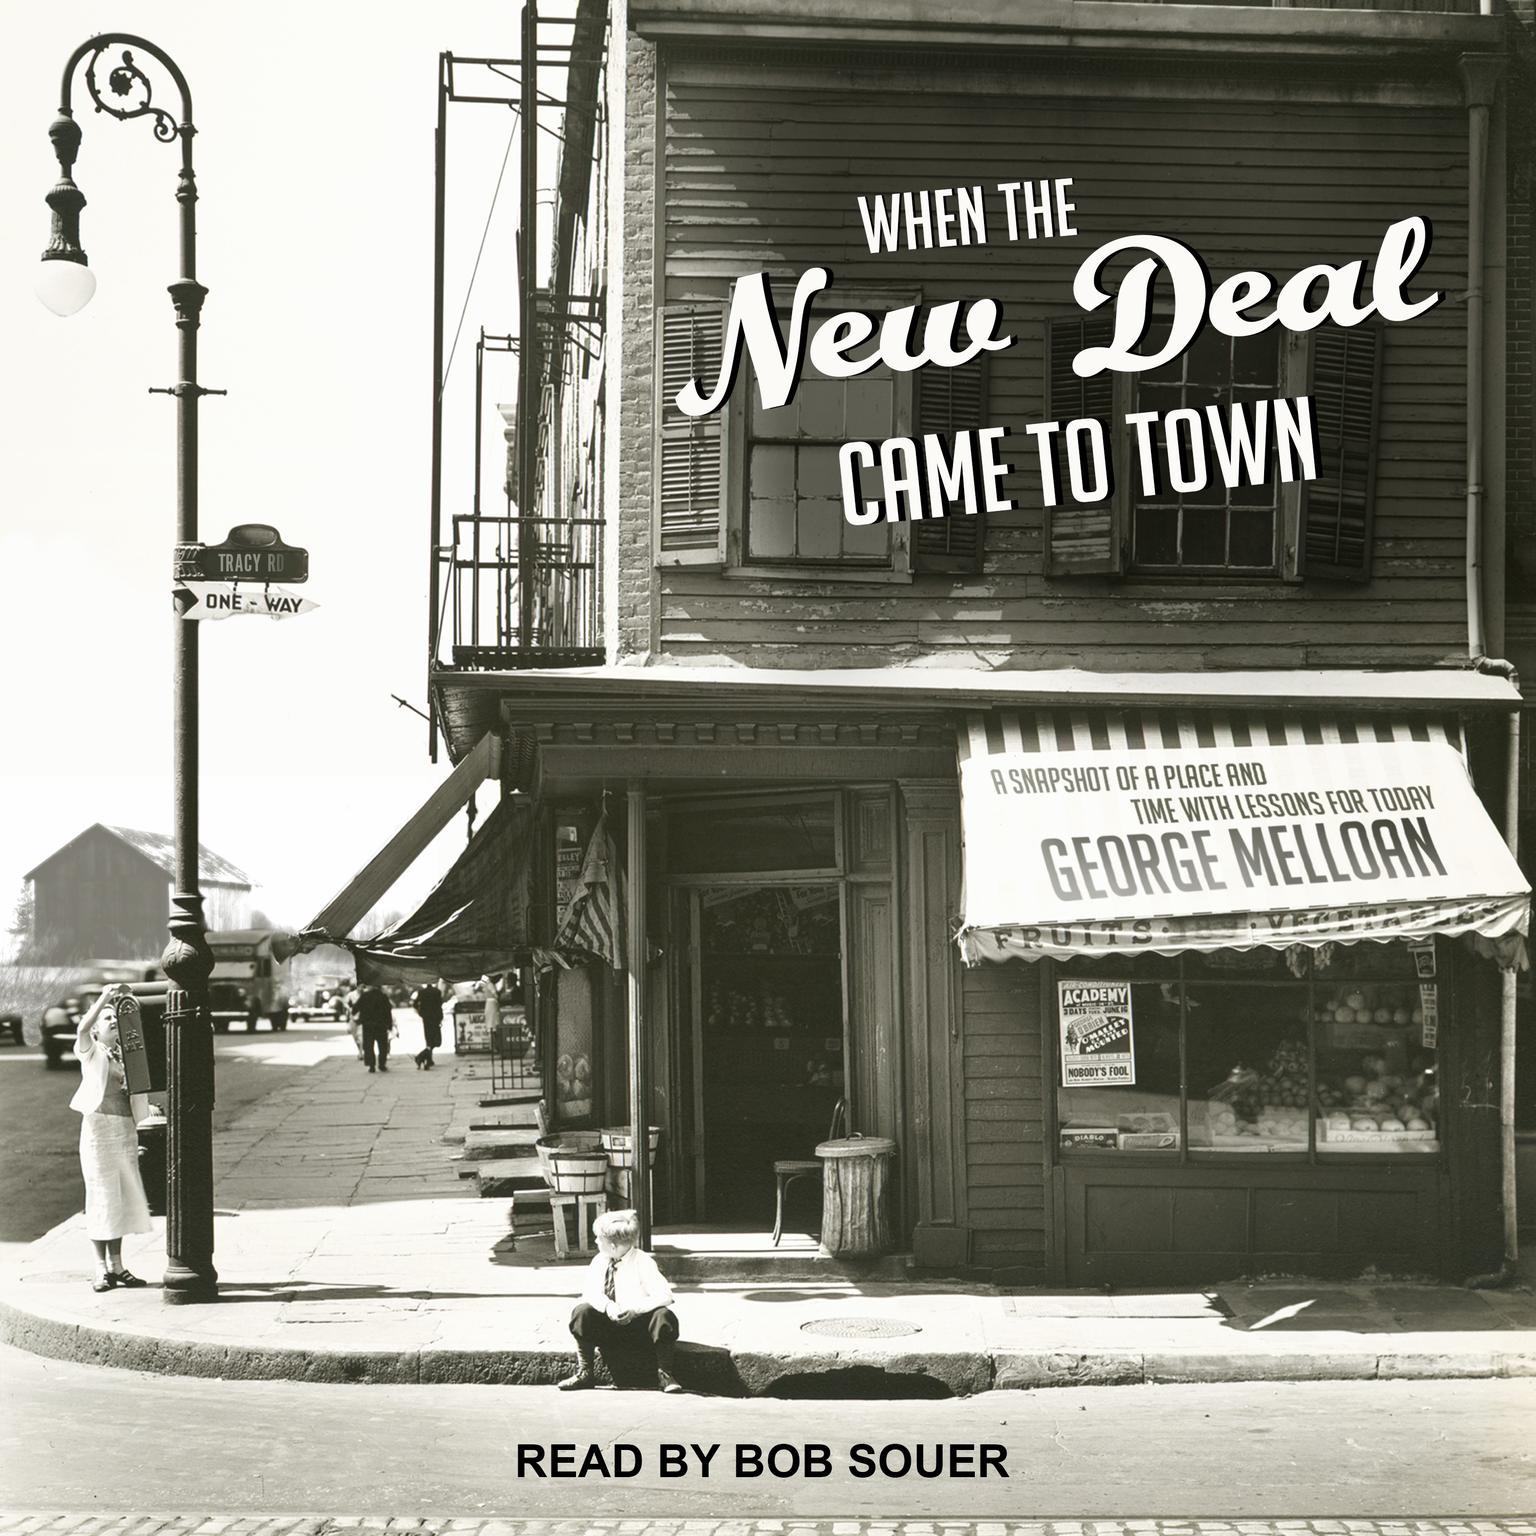 When the New Deal Came to Town: A Snapshot of a Place and Time with Lessons for Today Audiobook, by George Melloan